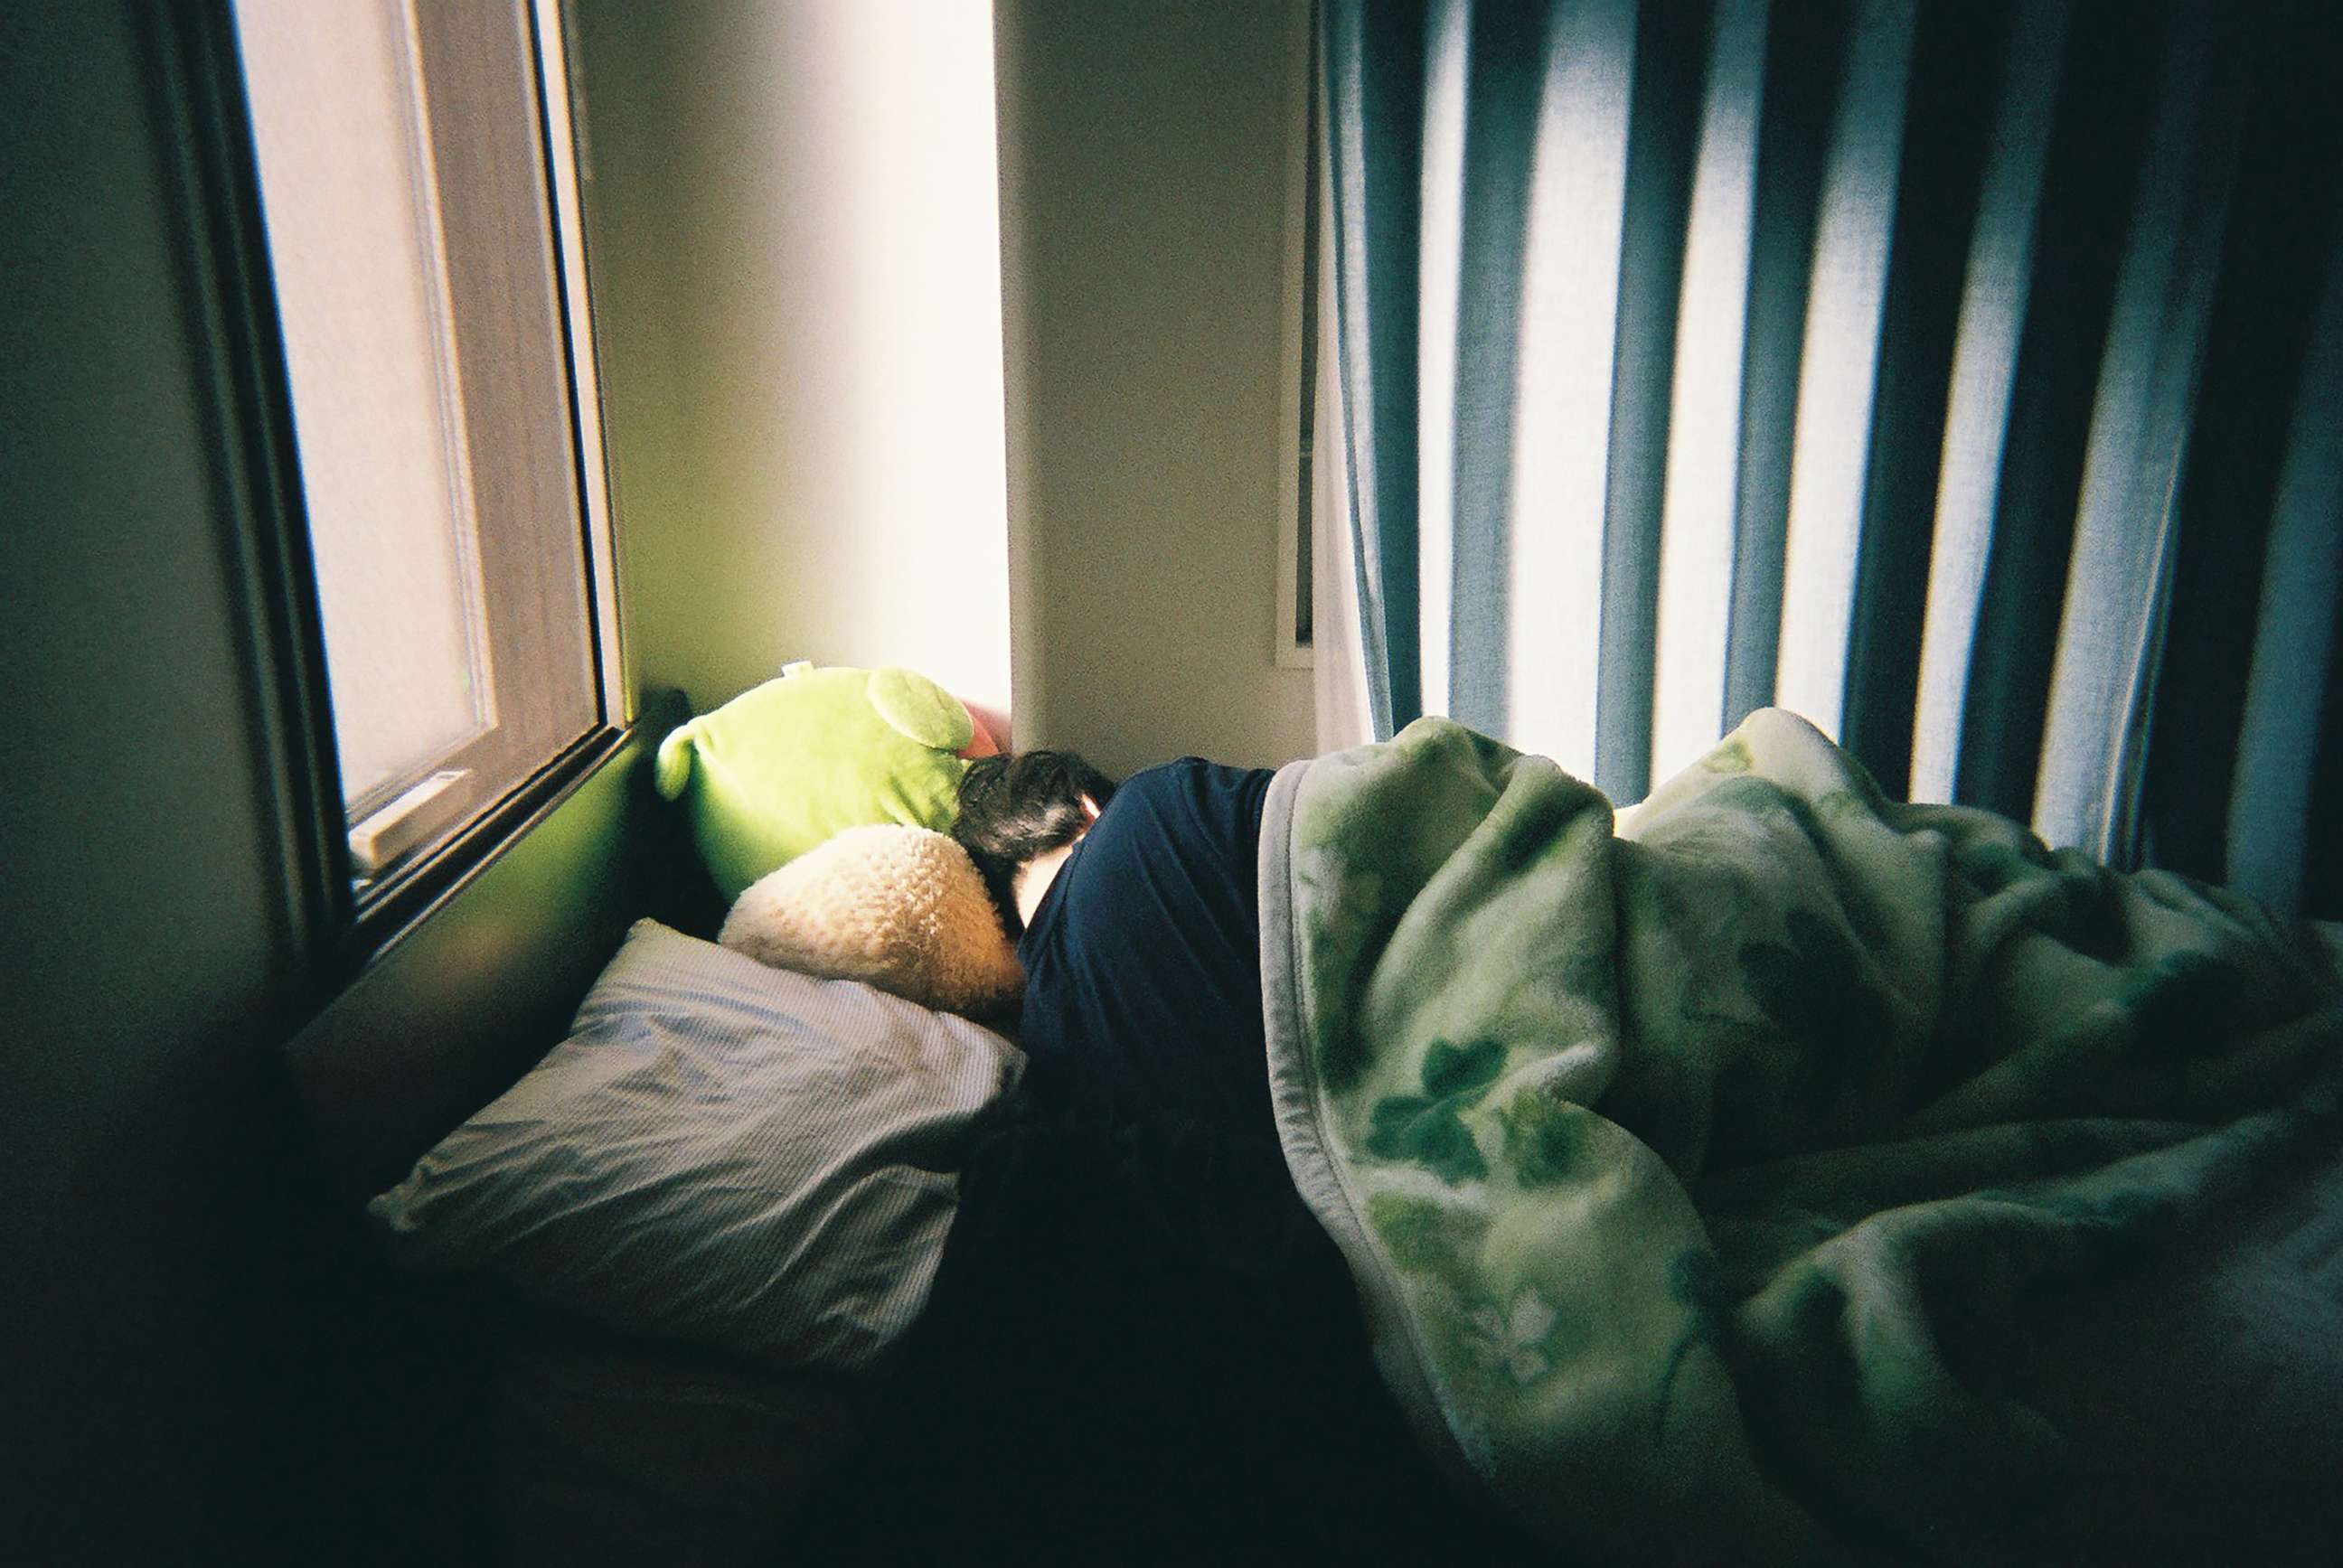 PHOTO: A person is pictured sleeping in this undated stock photo.